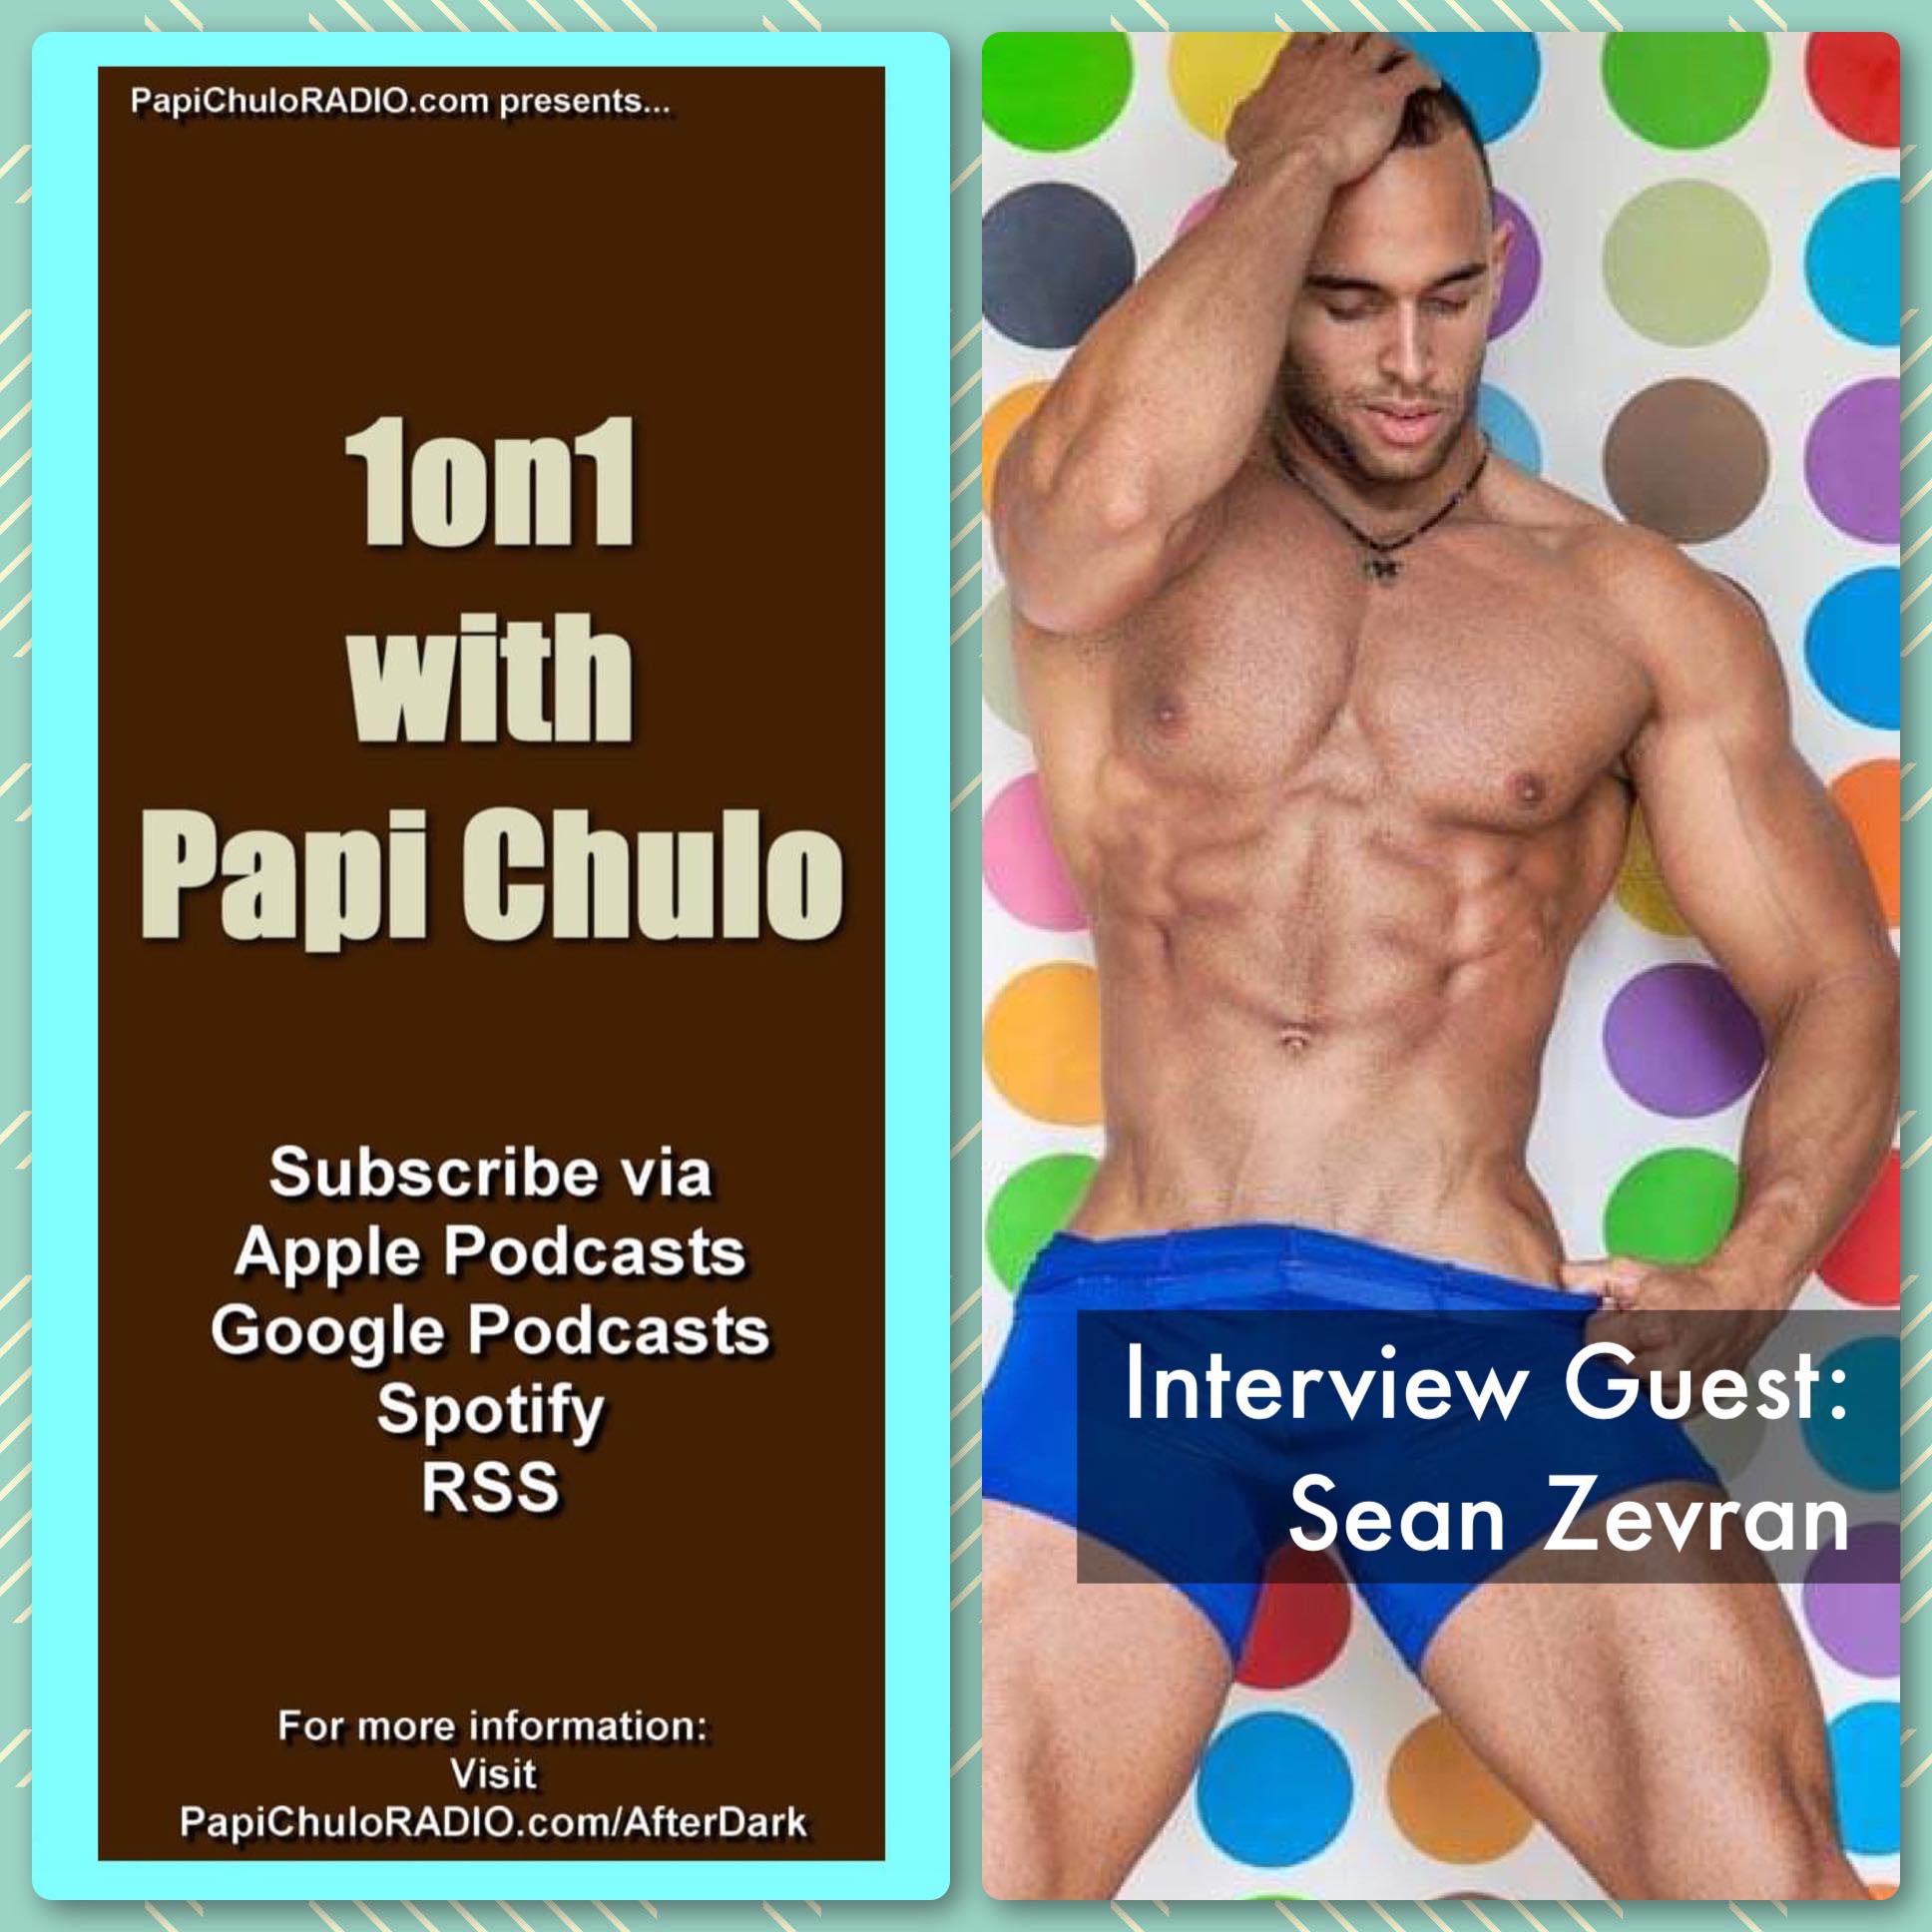 1on1 with Papi Chulo – Special Guest: SEAN ZEVRAN [April 23, 2015]